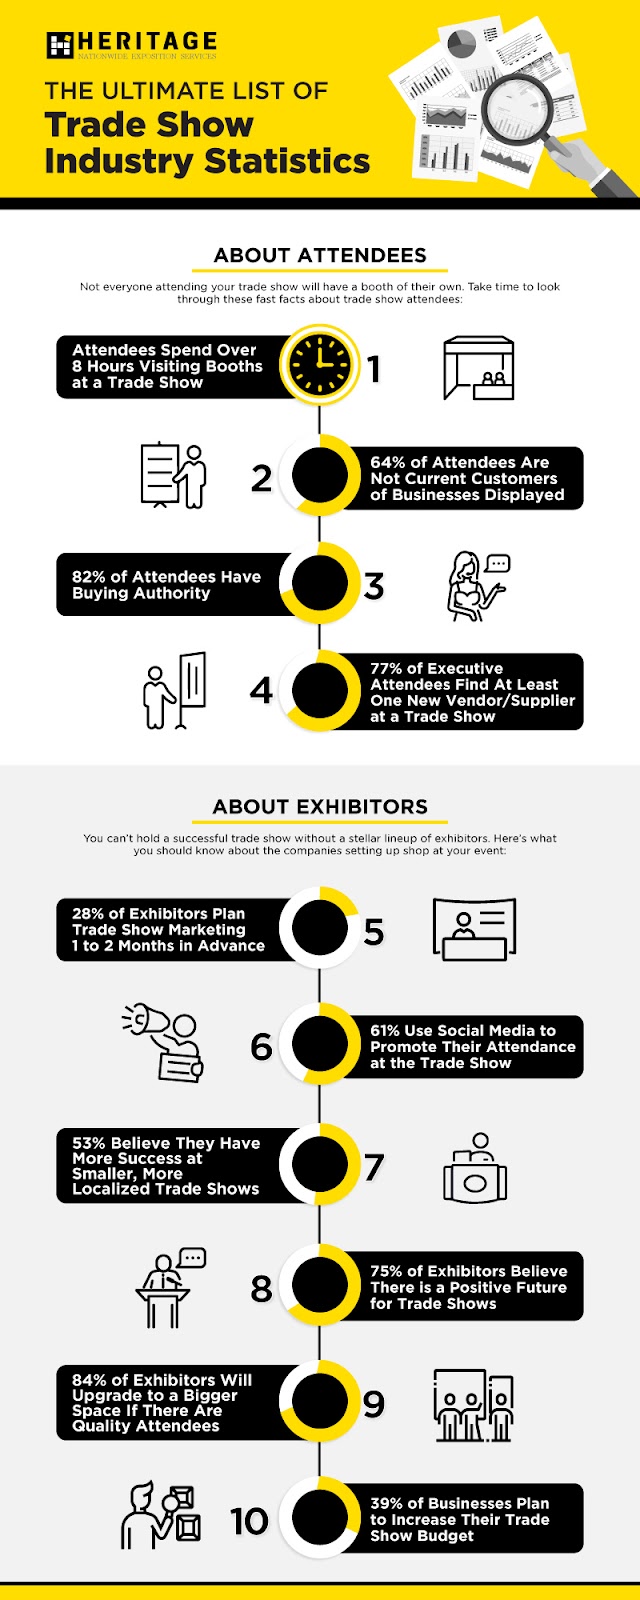 The Ultimate List of Trade Show Industry Statistics